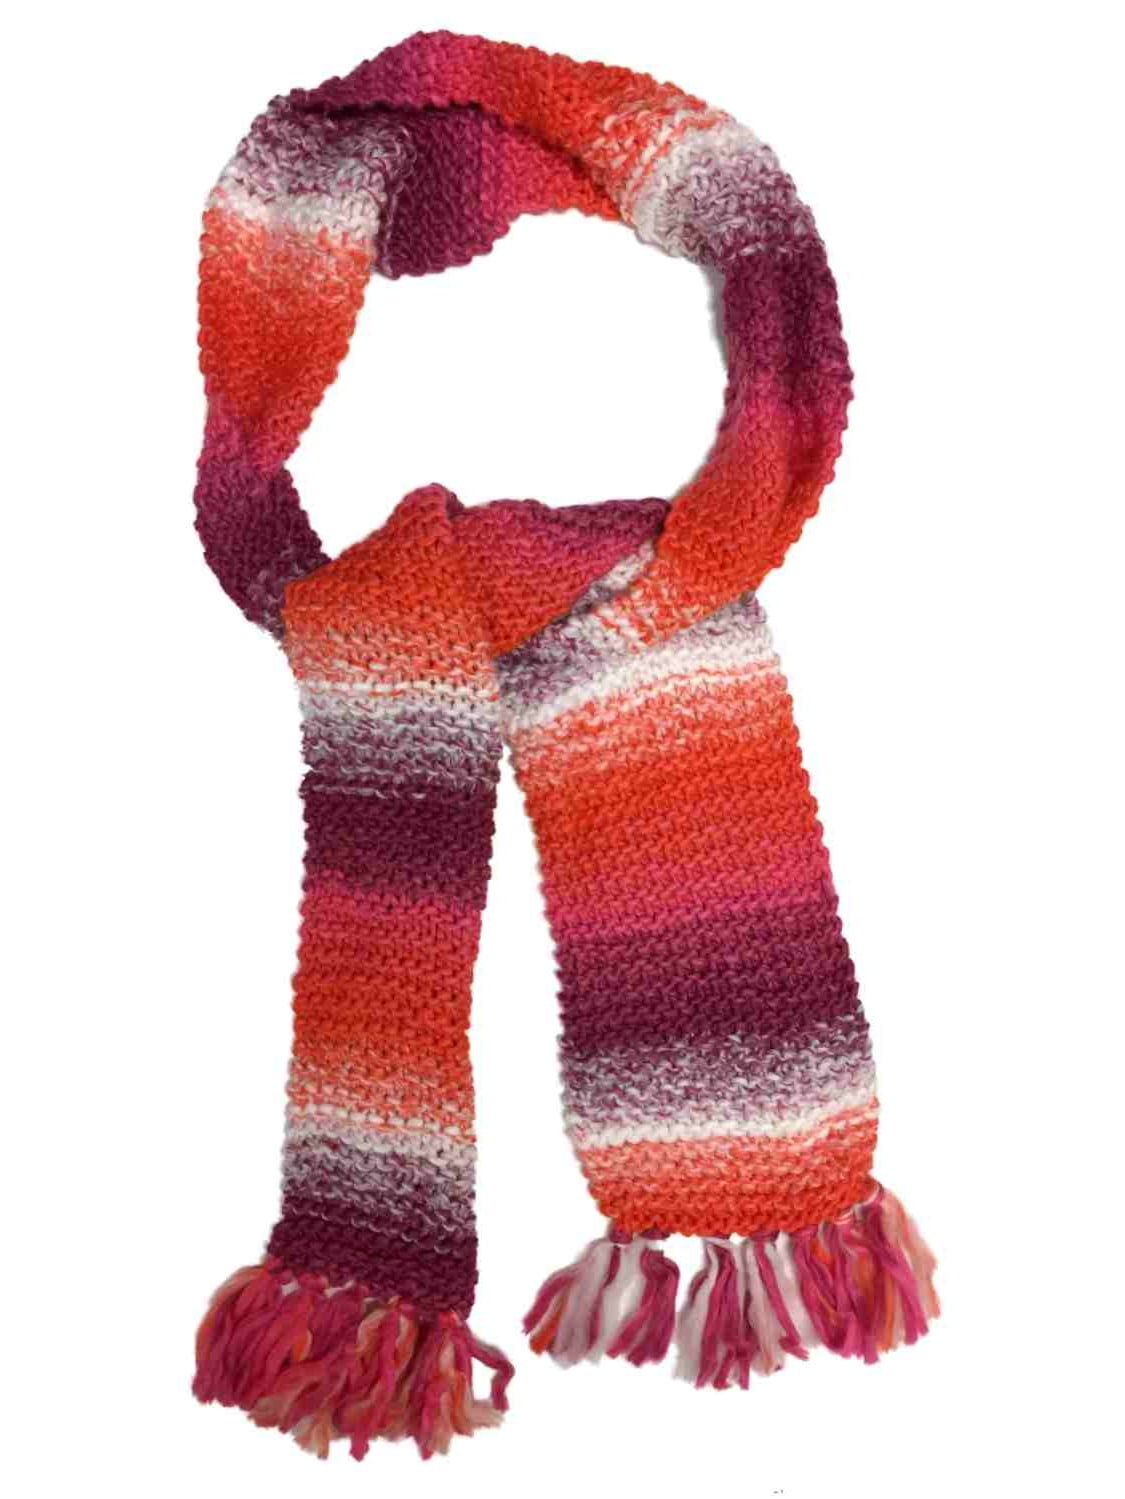 60" Long X 6" Wide Winter Cable Knit Scarf with Fringe in  Assorted Colors 